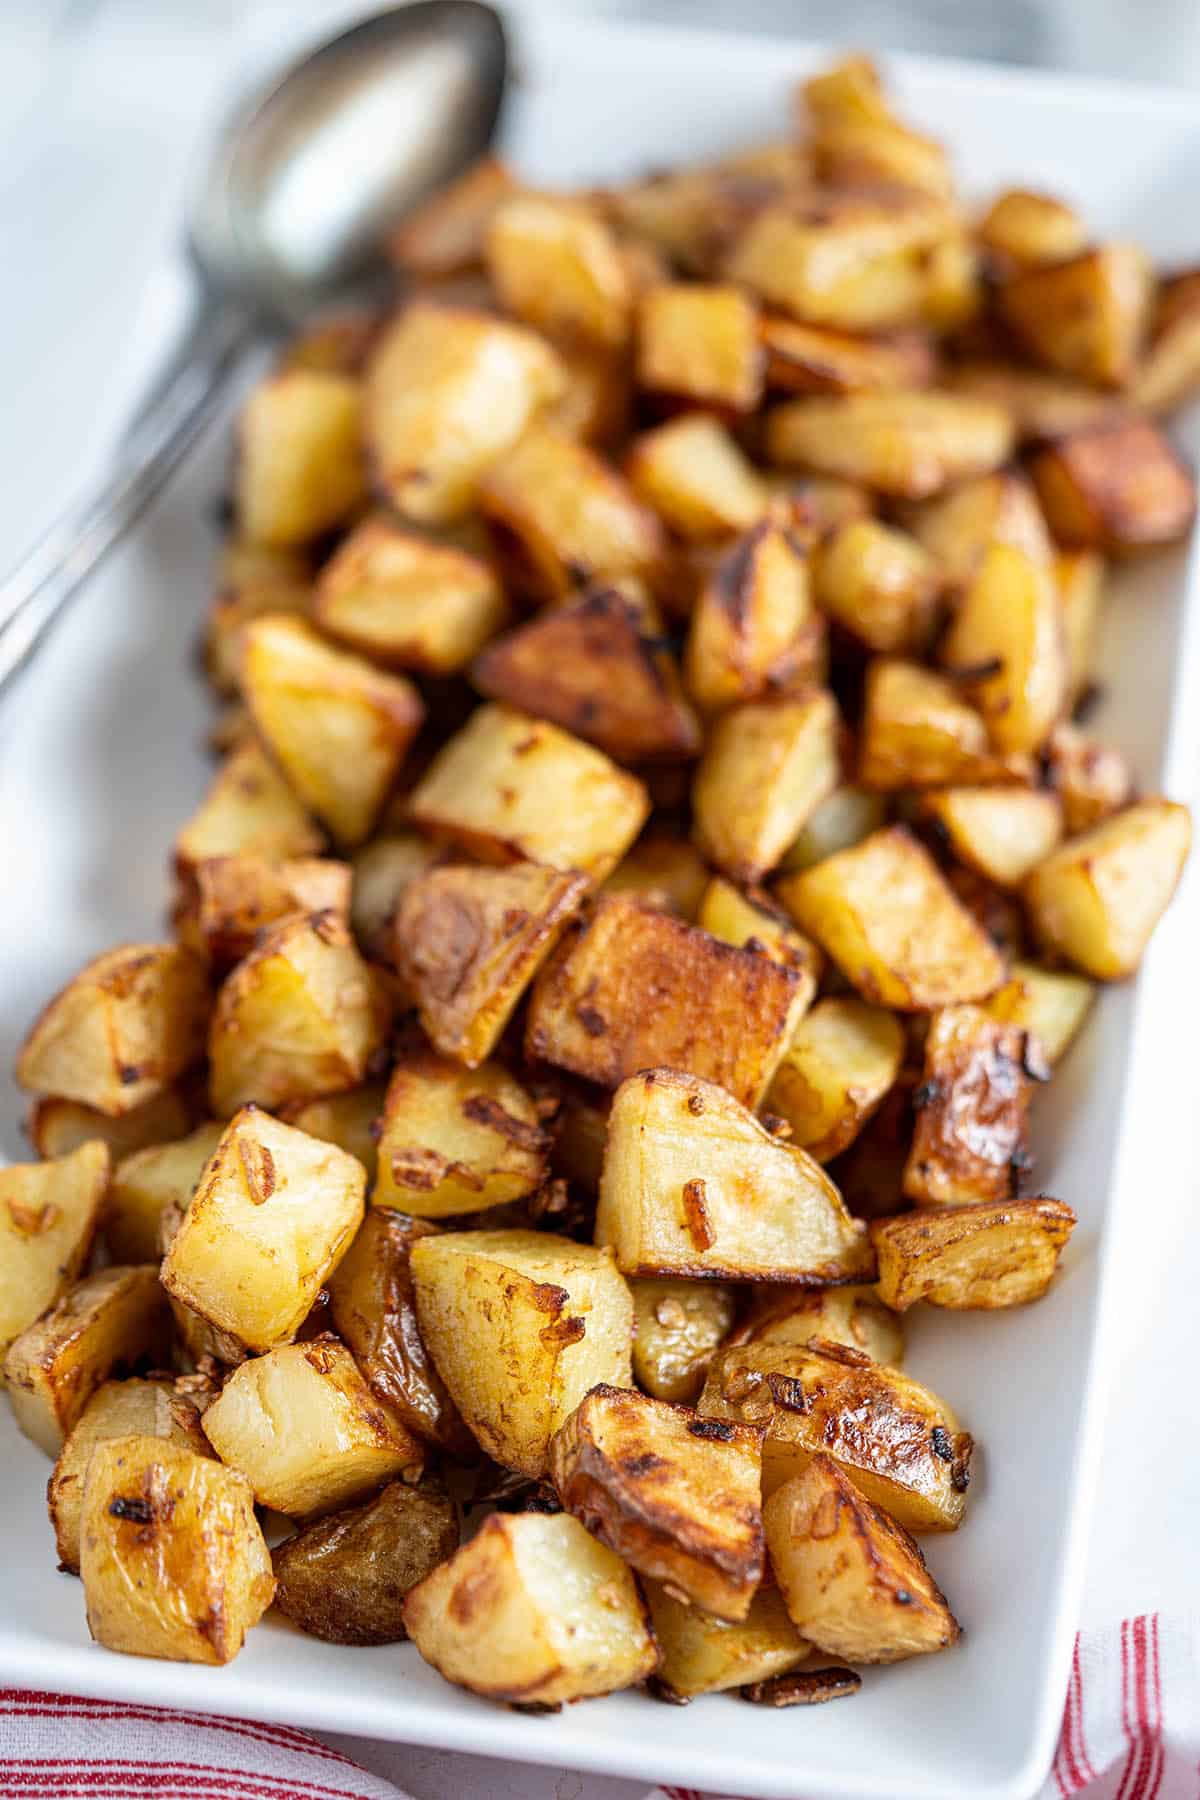 Roasted Potatoes on a platter with a serving spoon.